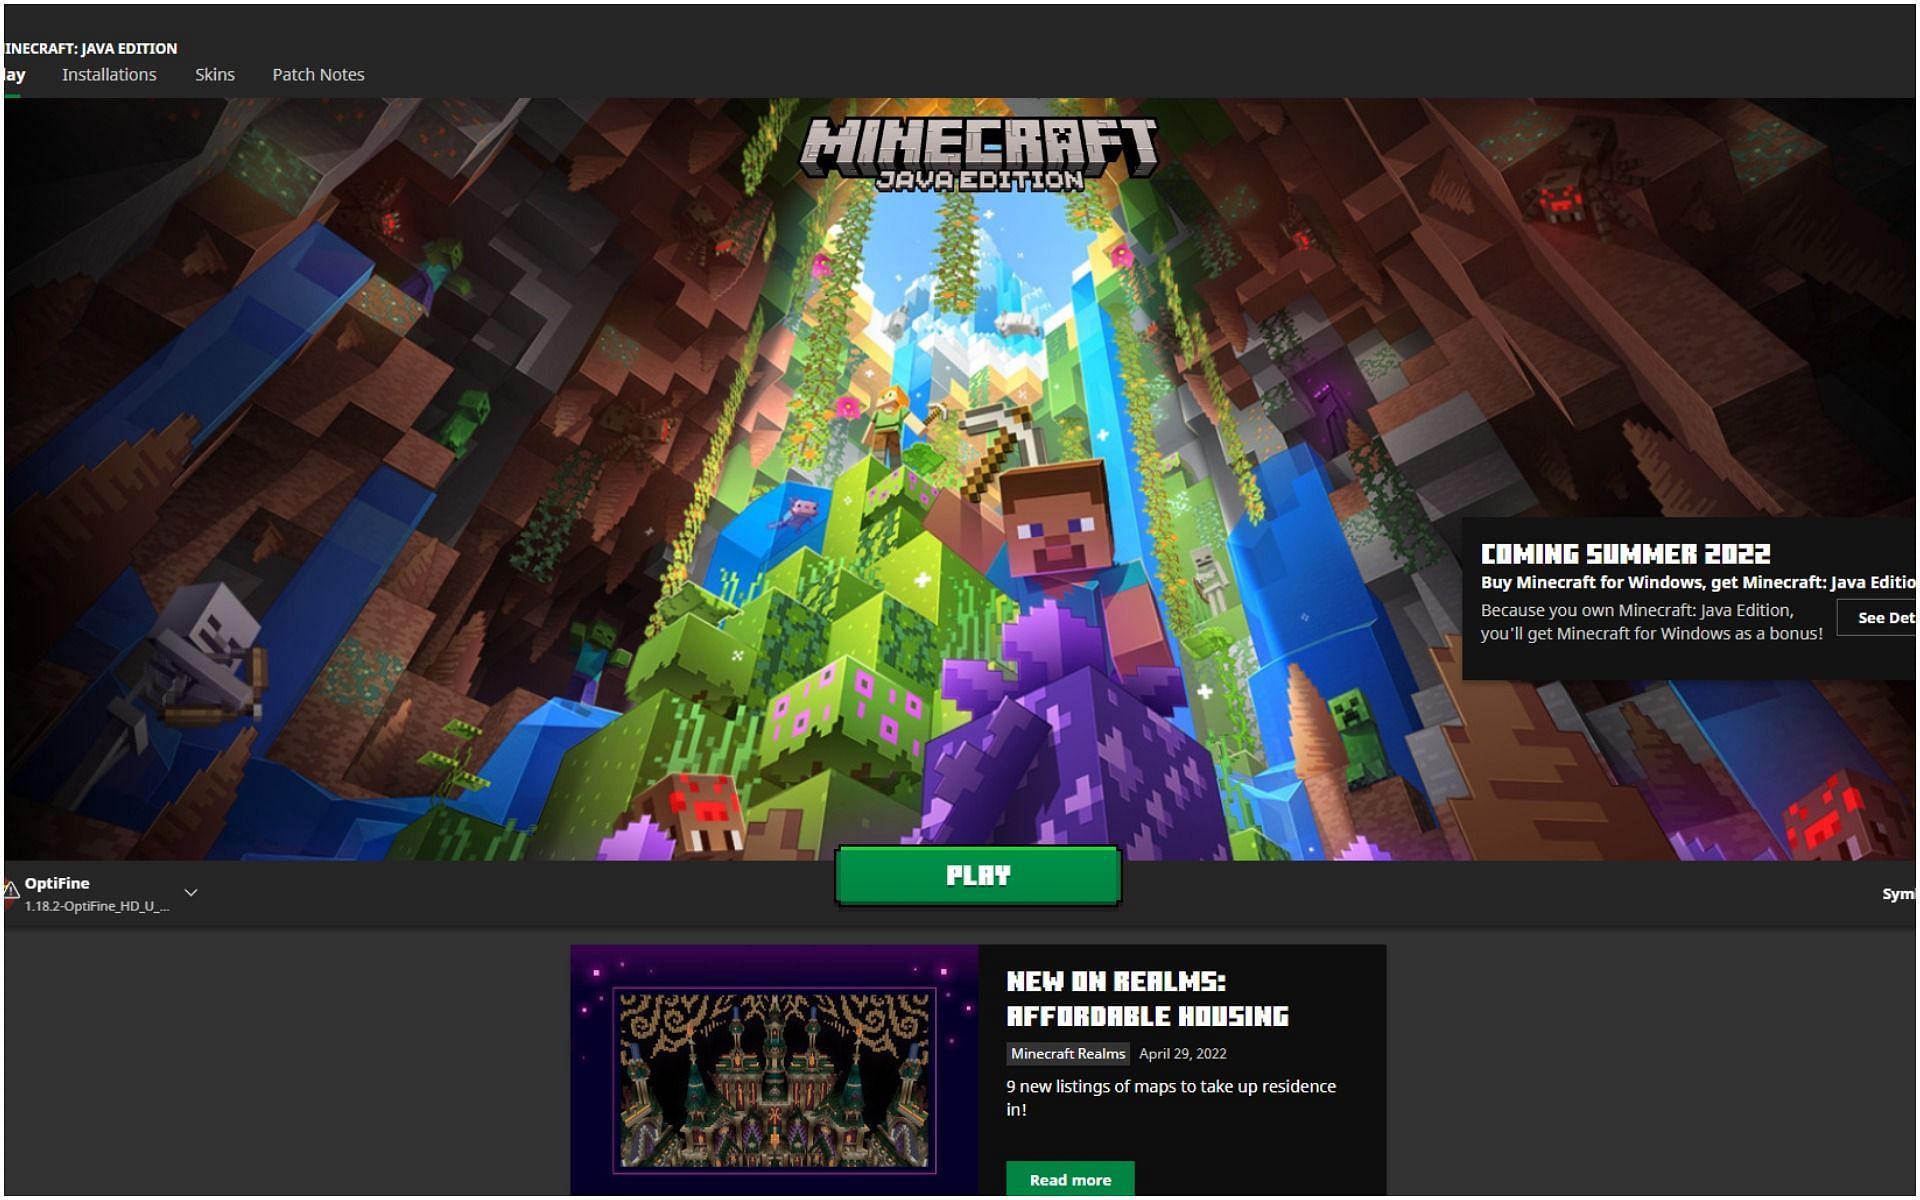 minecraft try restarting your game and launcher